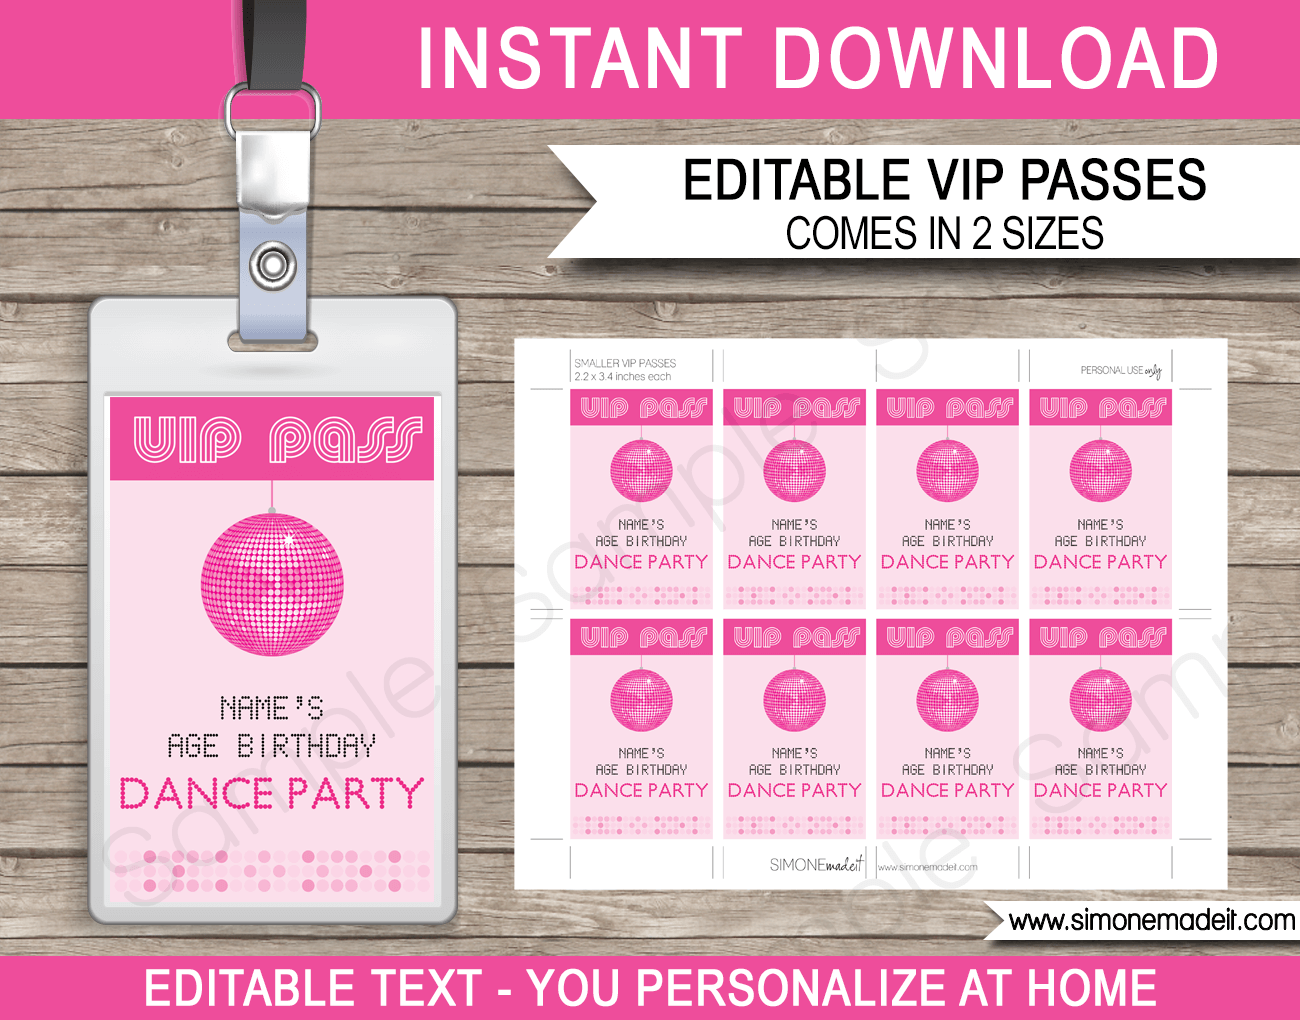 Dance Party VIP Passes | Disco Party Theme | Printable Inserts | QR Codes | Party Favors | Birthday Party | Editable DIY Template | $3.50 INSTANT DOWNLOAD via SIMONEmadeit.com